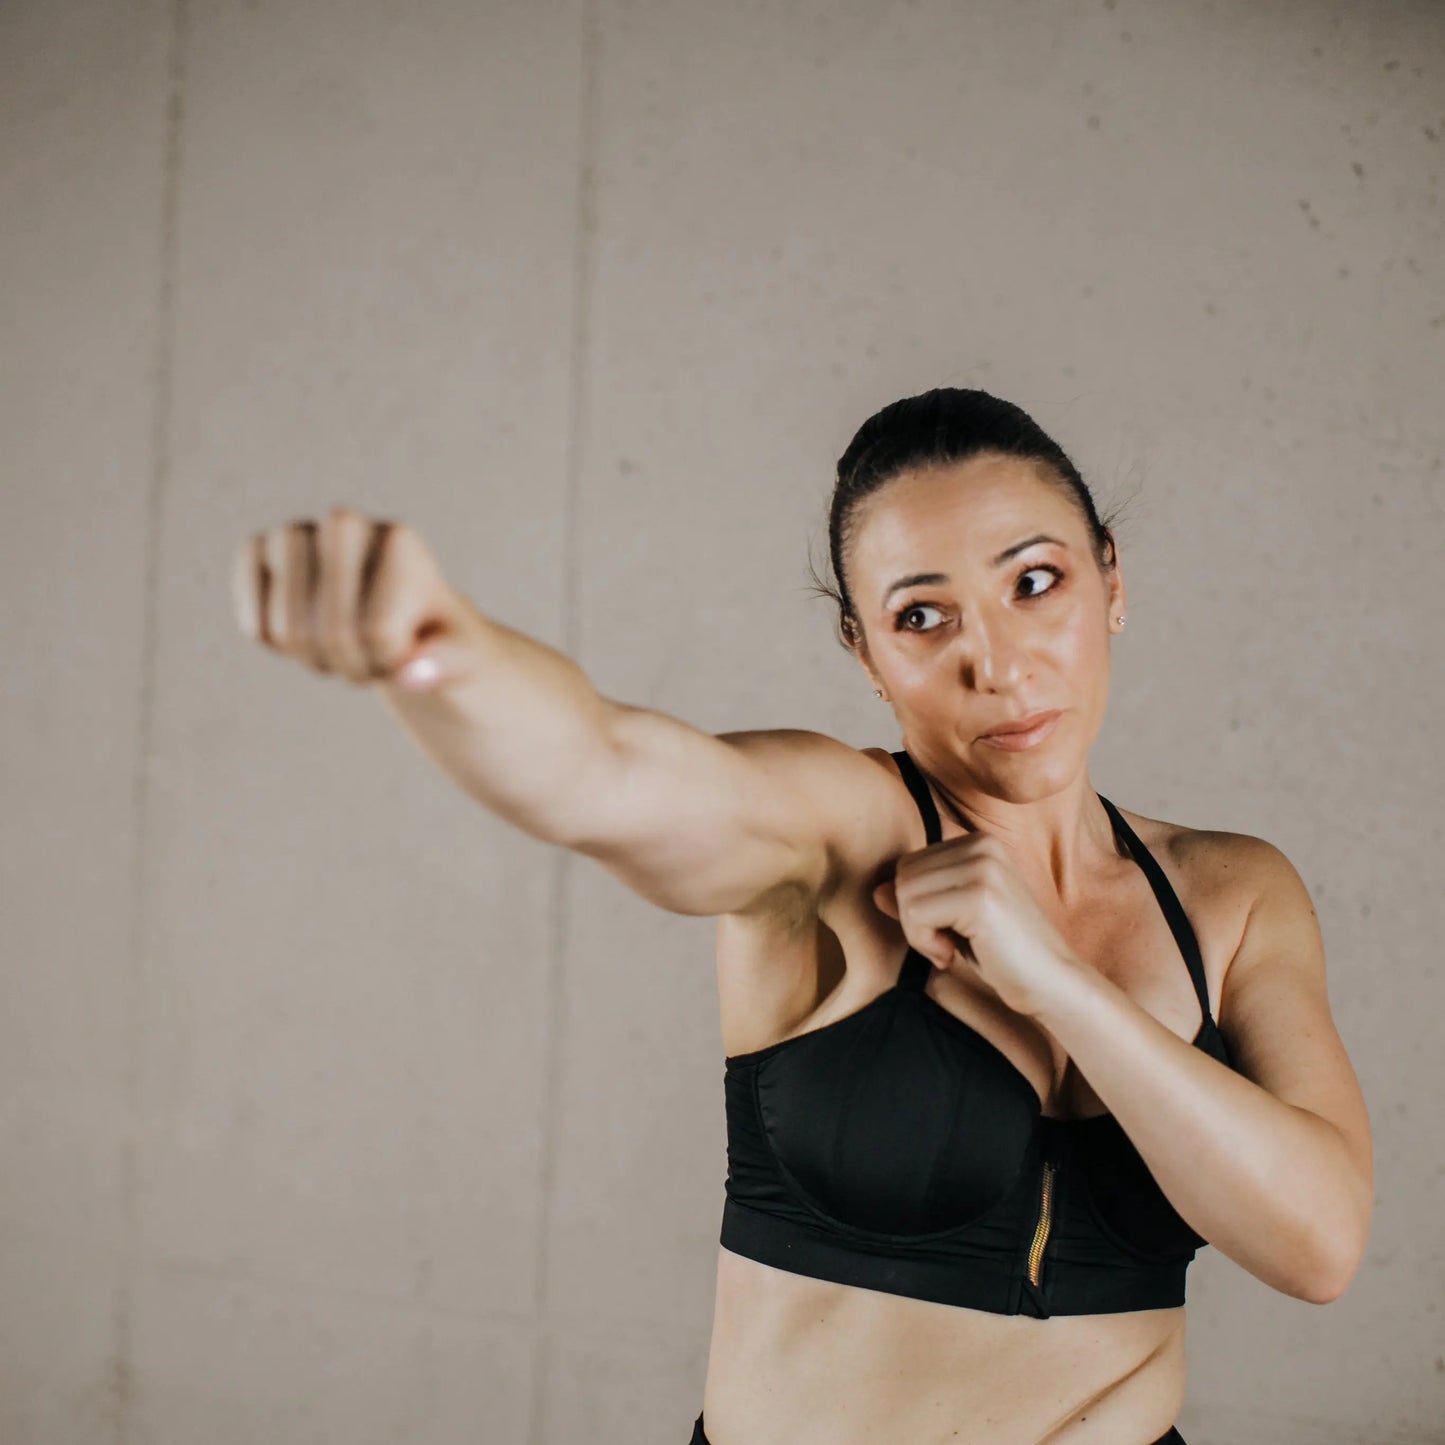 A female model showcasing a black WILDRAX Balconette Sports Bra while demonstrating a boxing stance in a gym